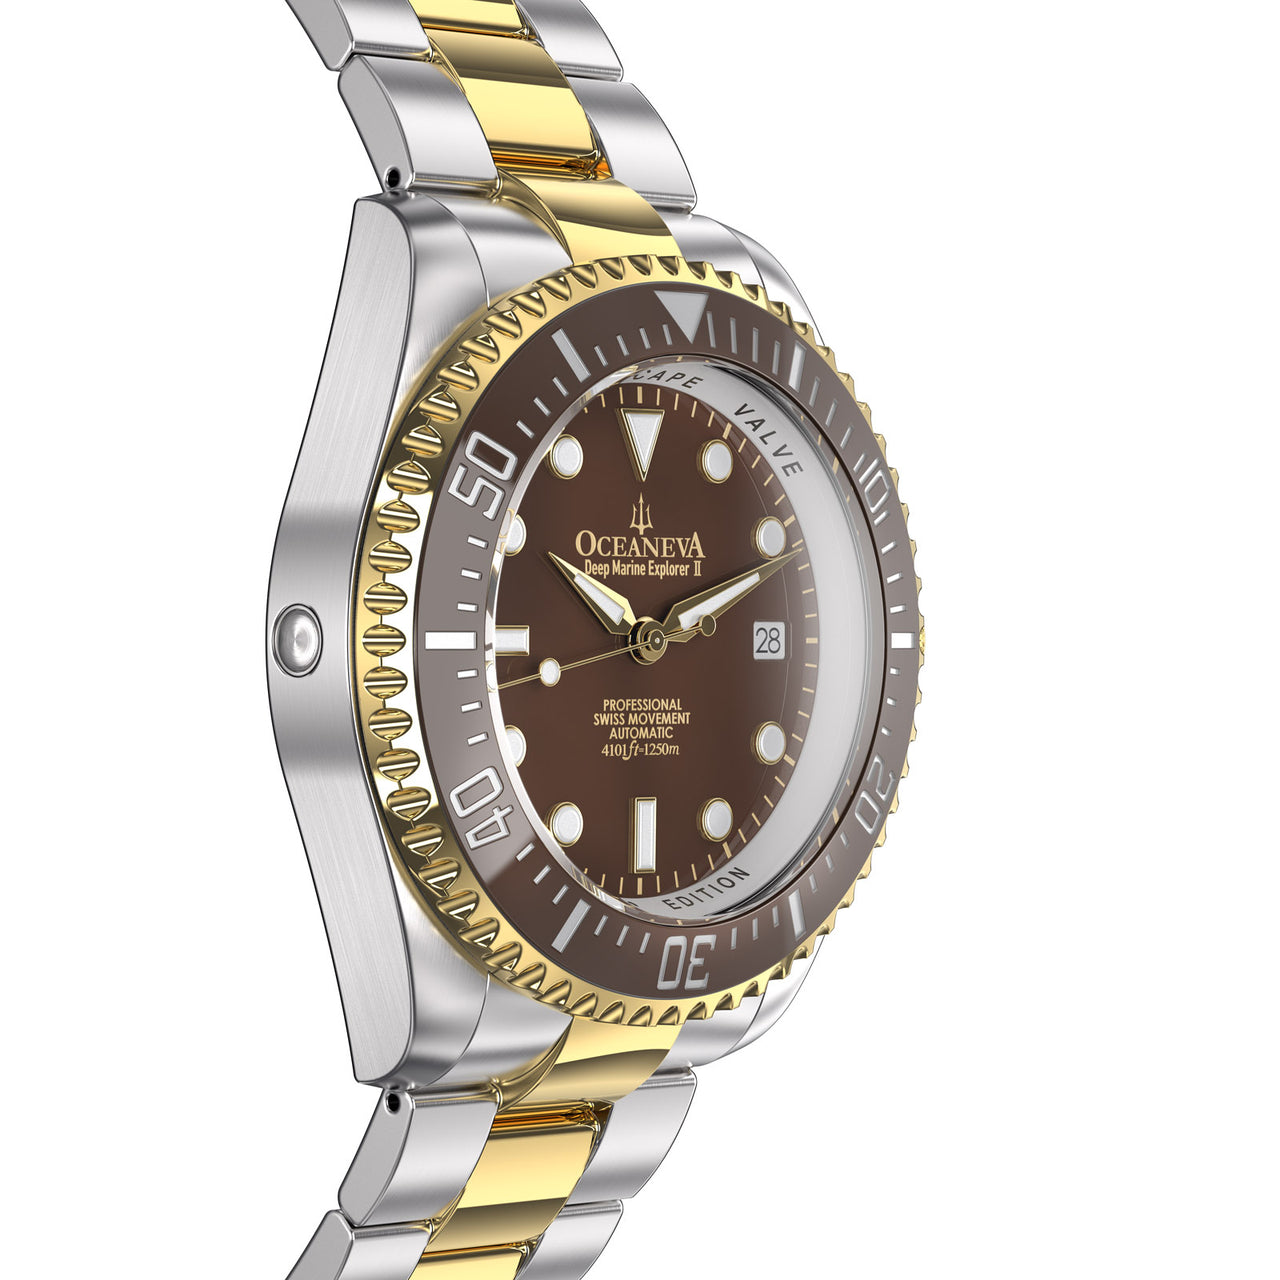 Oceaneva 1250M Dive Watch Brown And Gold Side Helium Escape Valve View